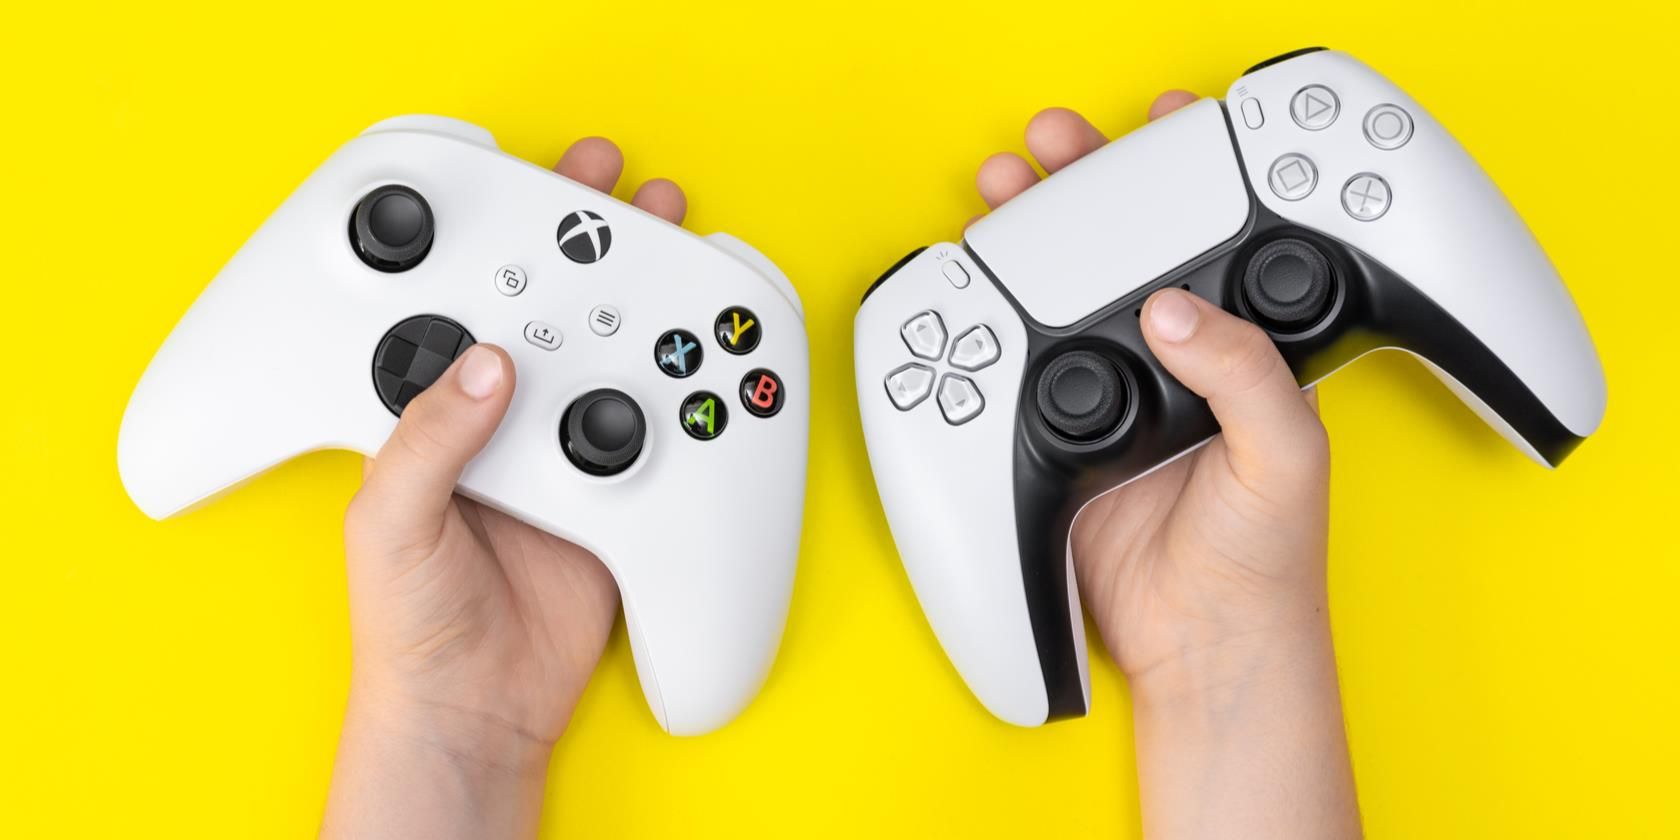 Snel jurk radium PS5 vs. Xbox Series X: Which Console Should You Buy This Generation?